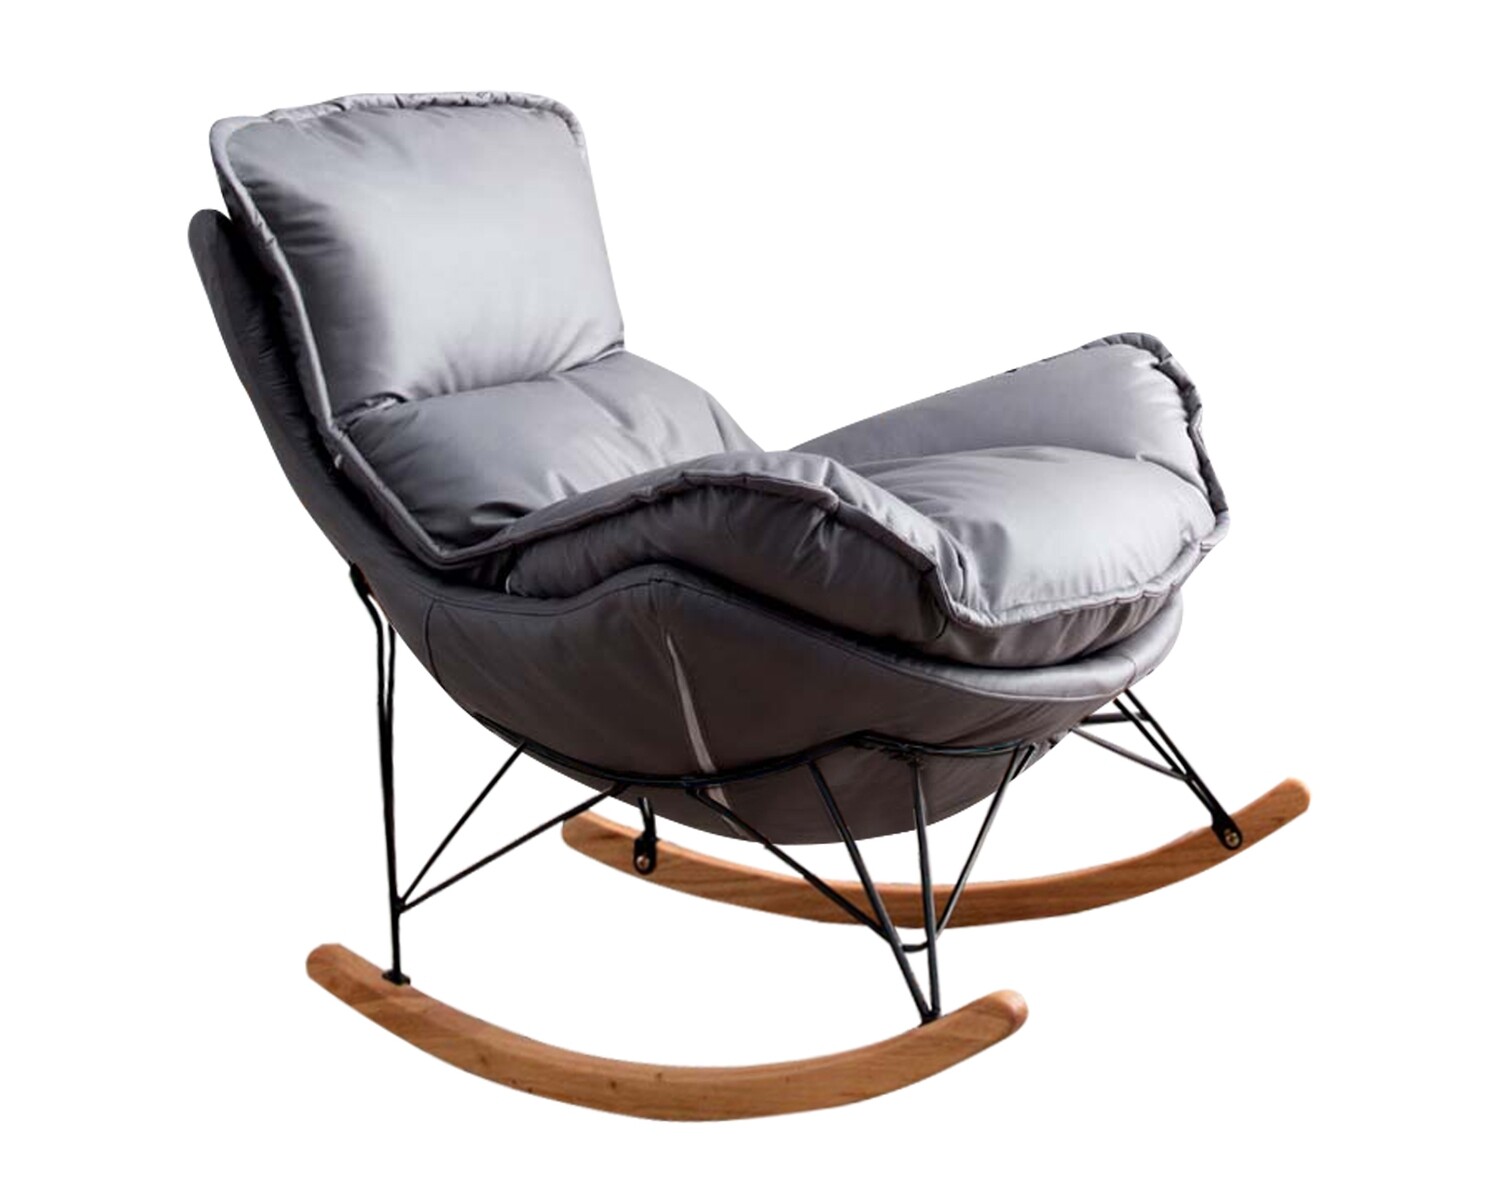 Flotti Leticia Living Room Rocking Chair with Ottoman (Grey)